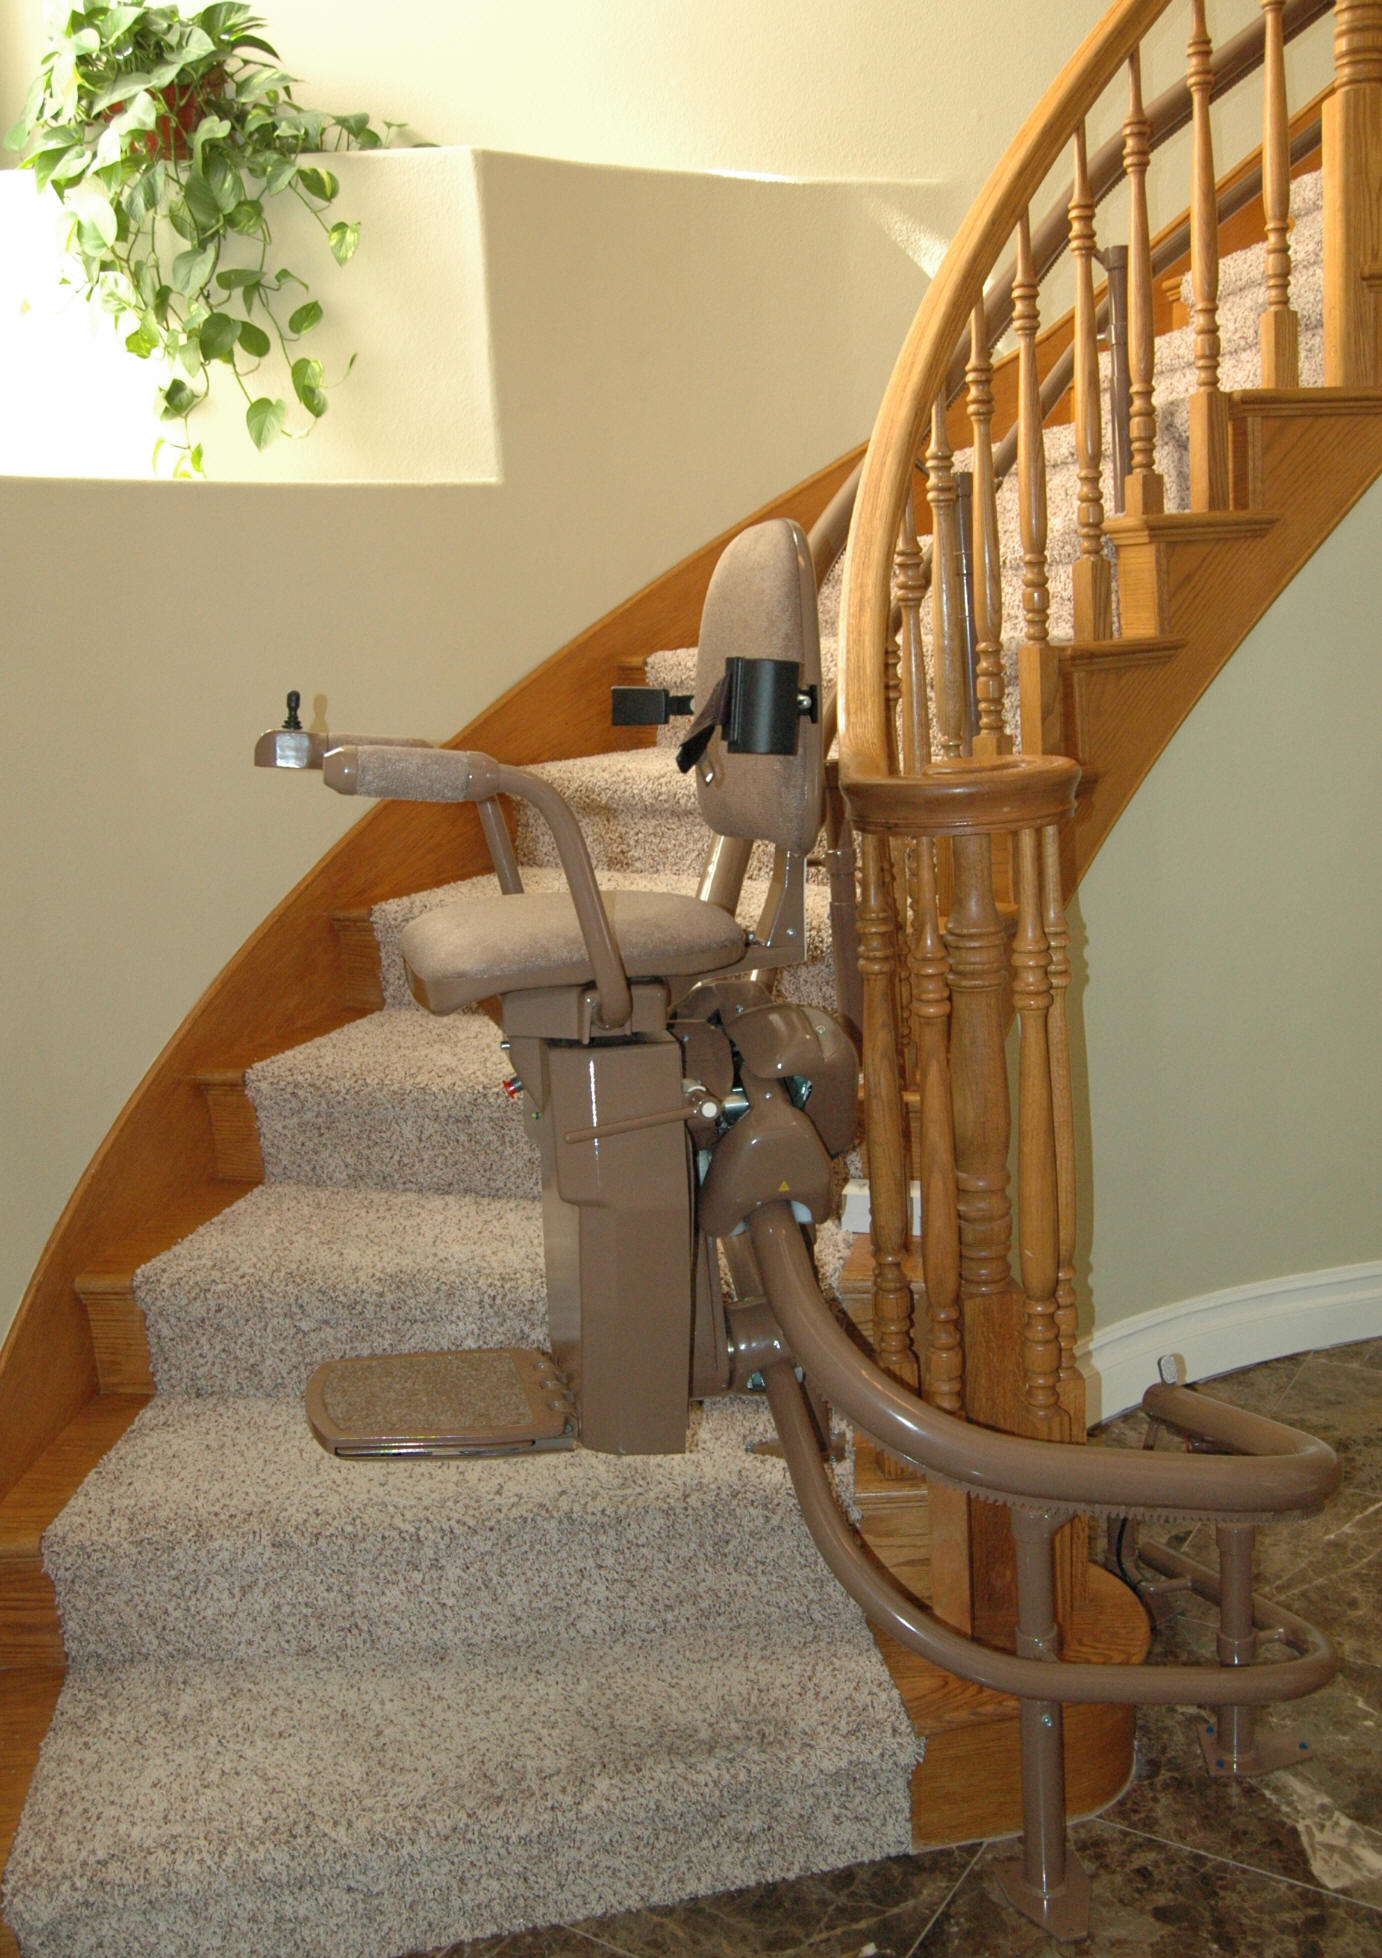 hawle precision curved stairchair anaheim ca are chair stair lifts